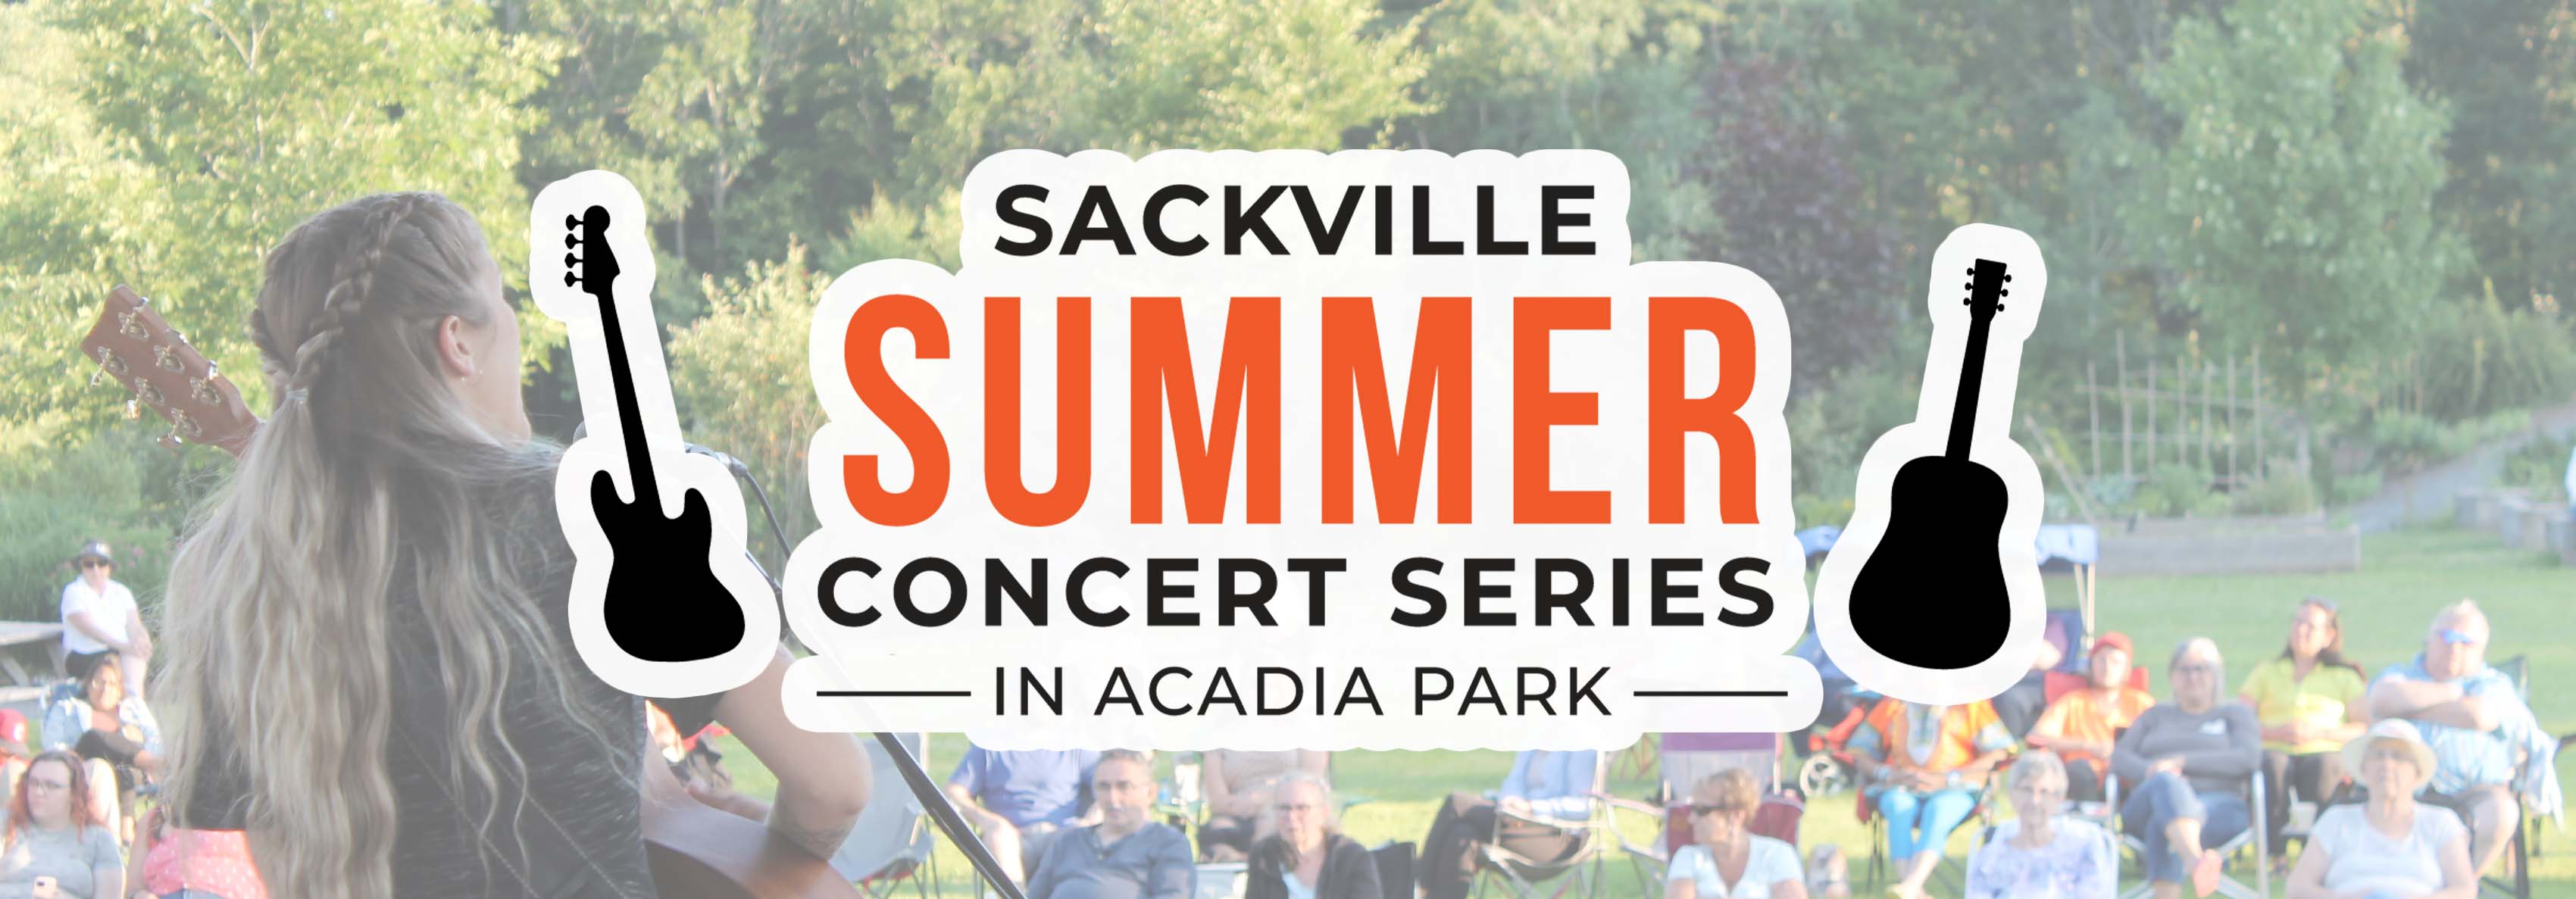 Kayla Mason plays for an audience in Acadia Park and text reads "Sackville Summer Concert Series in Acadia Park"